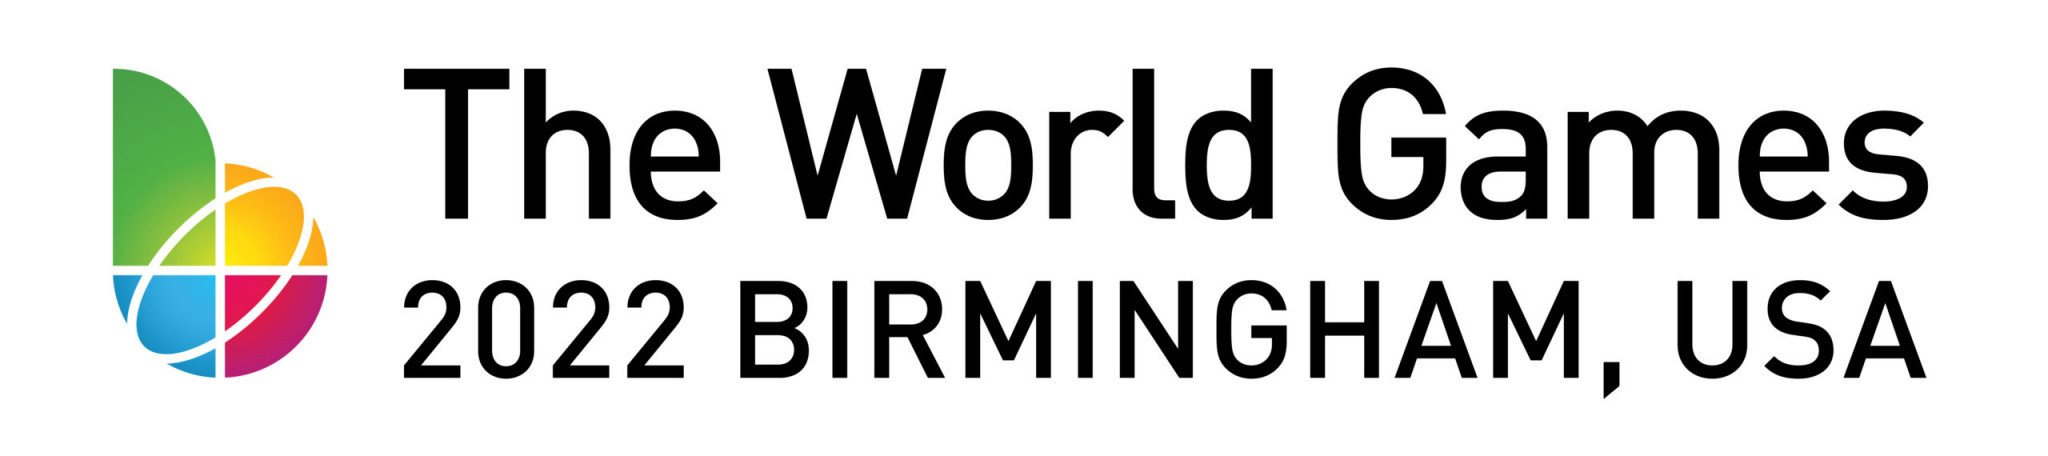 Birmingham in Alabama is set to host the delayed World Games from July 7 to 17 next year ©TWG2022